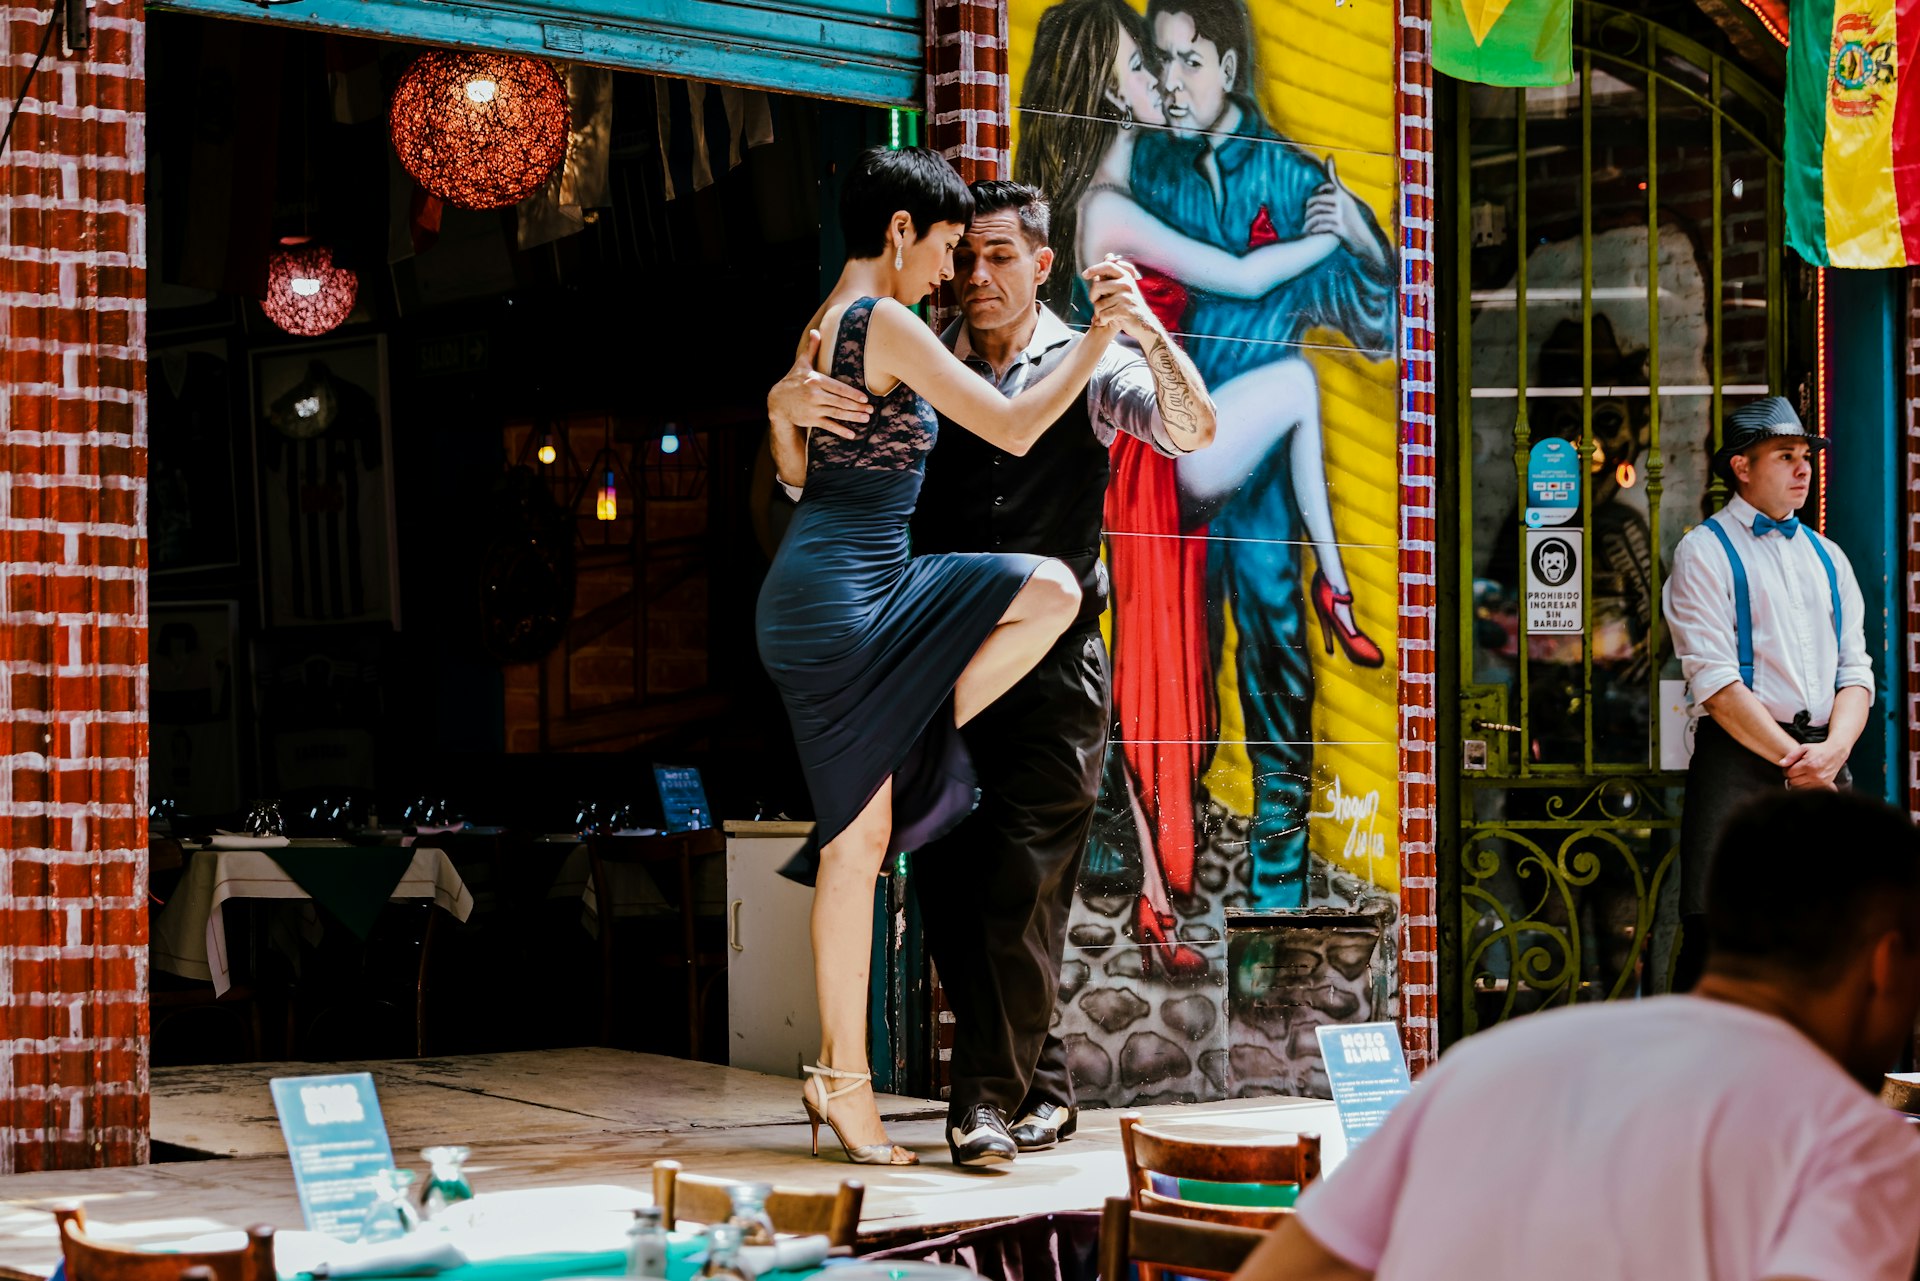 Dancers are performing the Argentine tango on the stage outside a restaurant